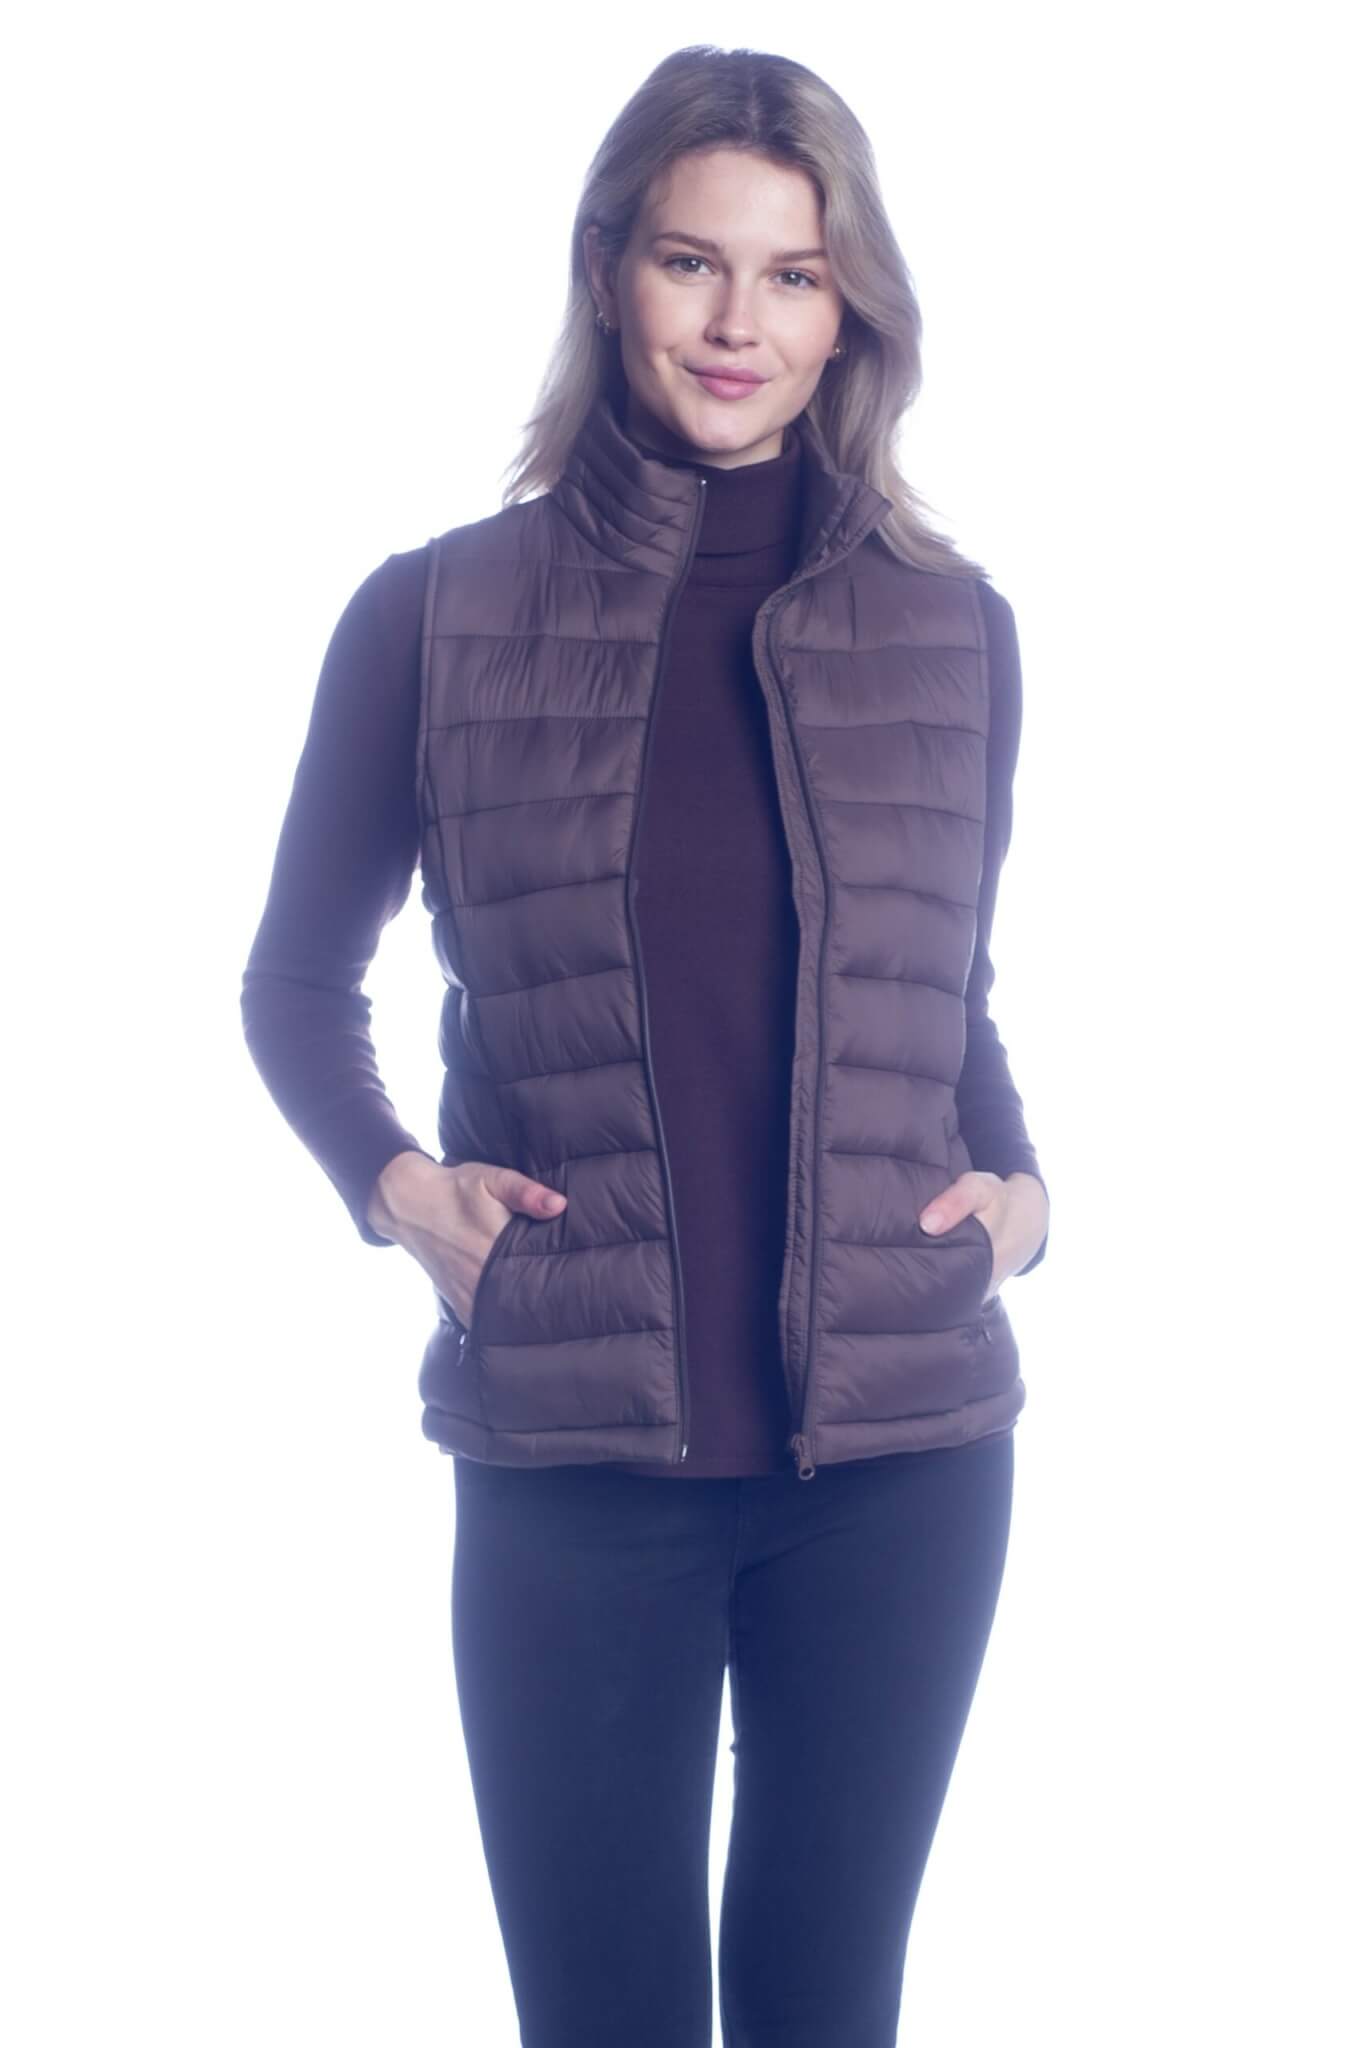 Padded Vest with Zipper Pockets